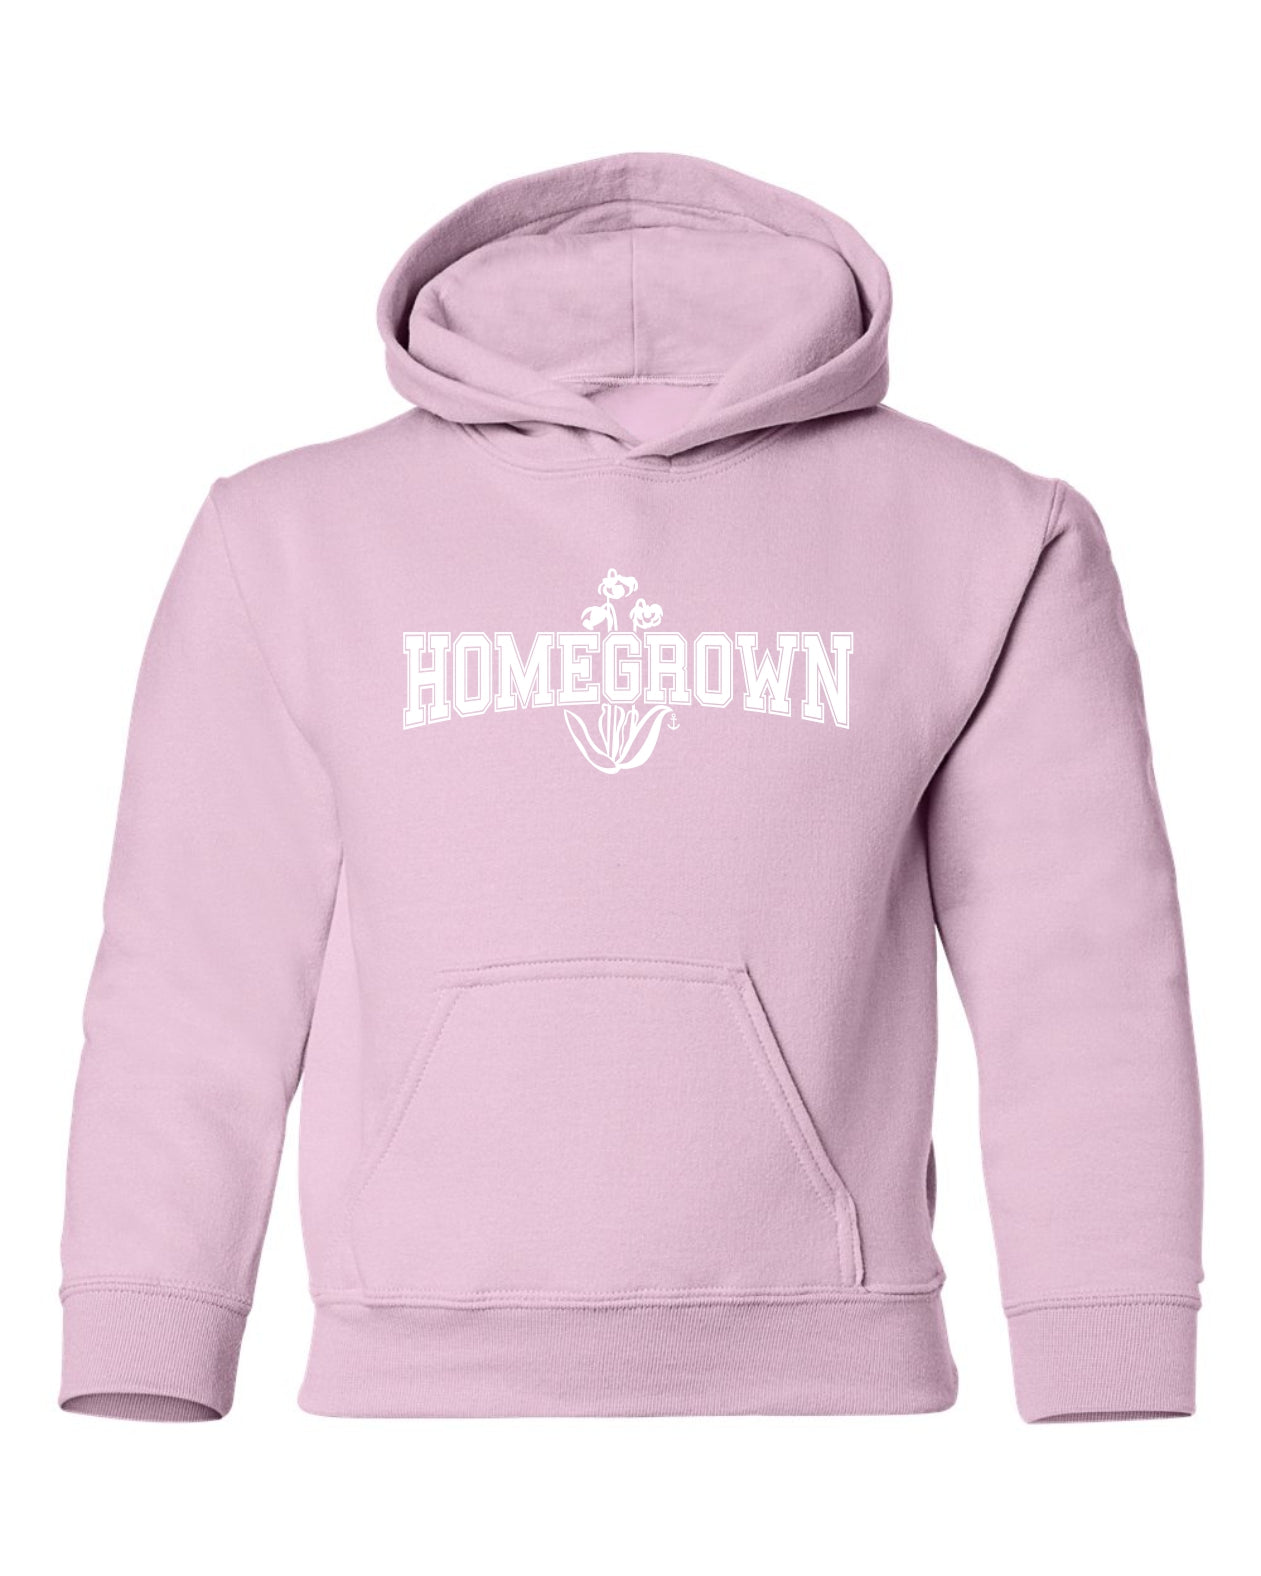 "Homegrown" Youth Hoodie